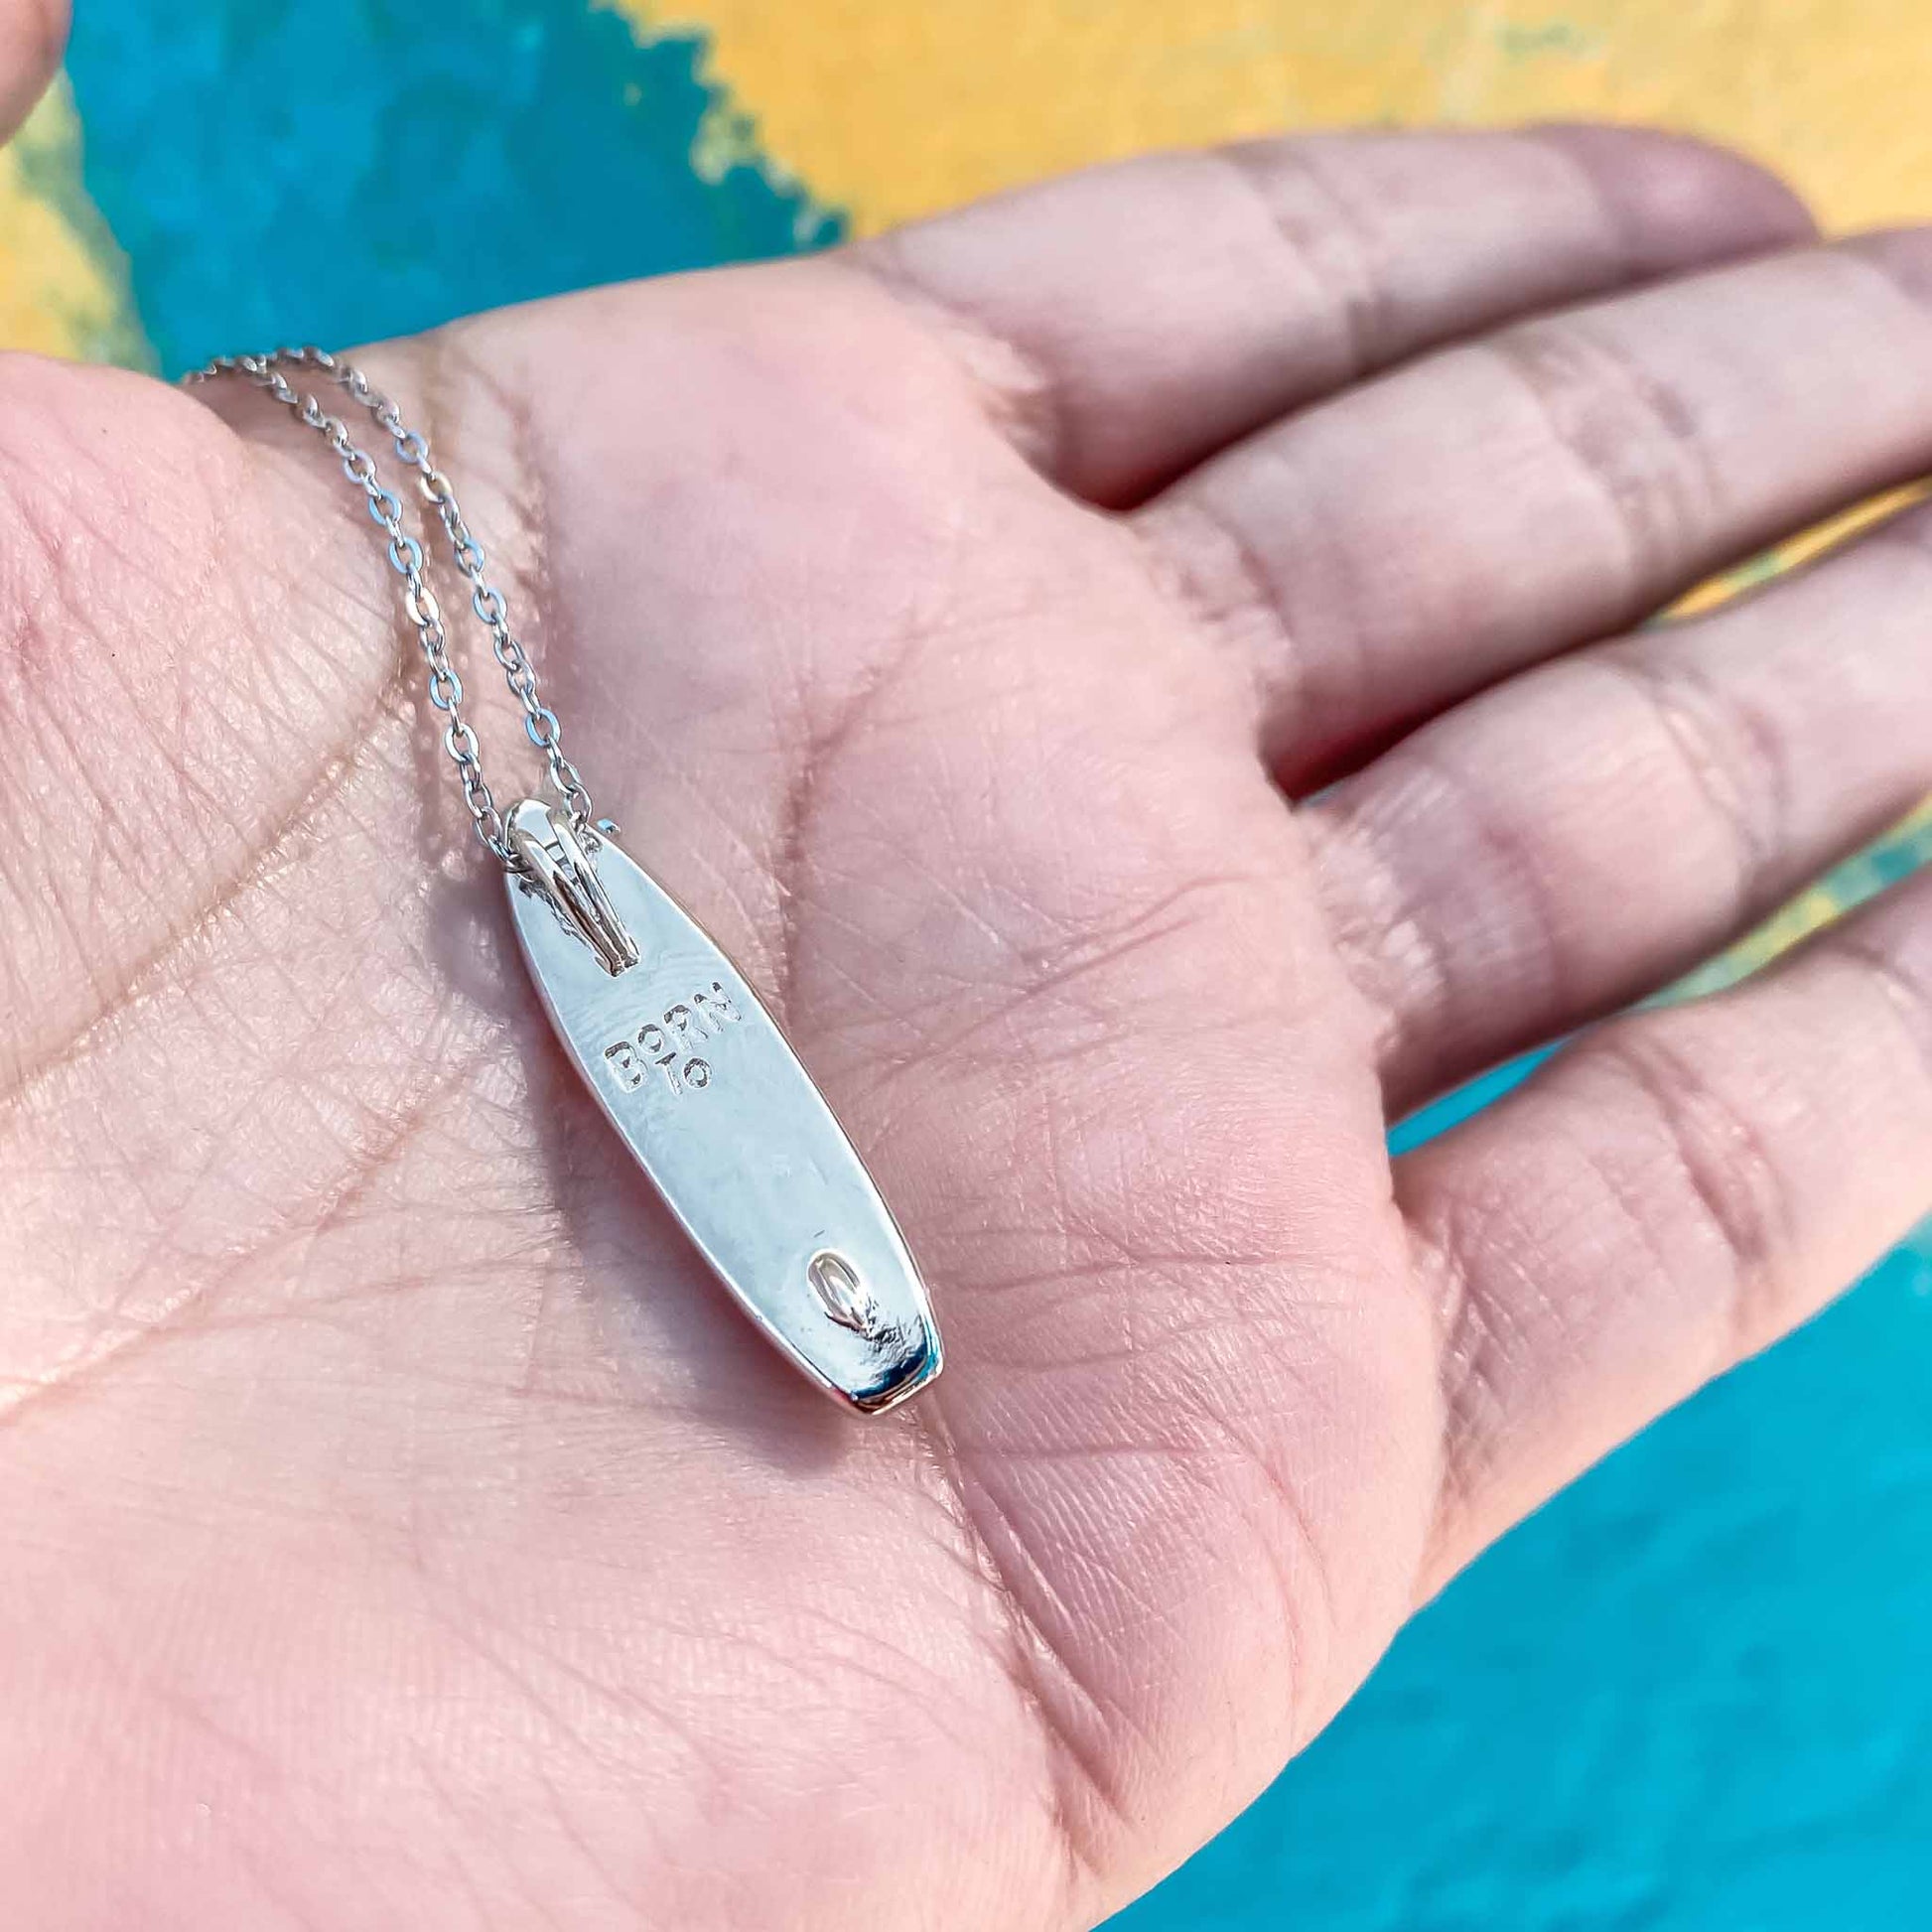 Looking for places to buy or rent a paddle board? This stand up paddle board pendant will be the best and highest performance SUP you'll ever find. Take your paddle board with you, even when you're not surfing, racing or touring. Shop May's birthstone SUP jewelry online or at a surf shop near you.